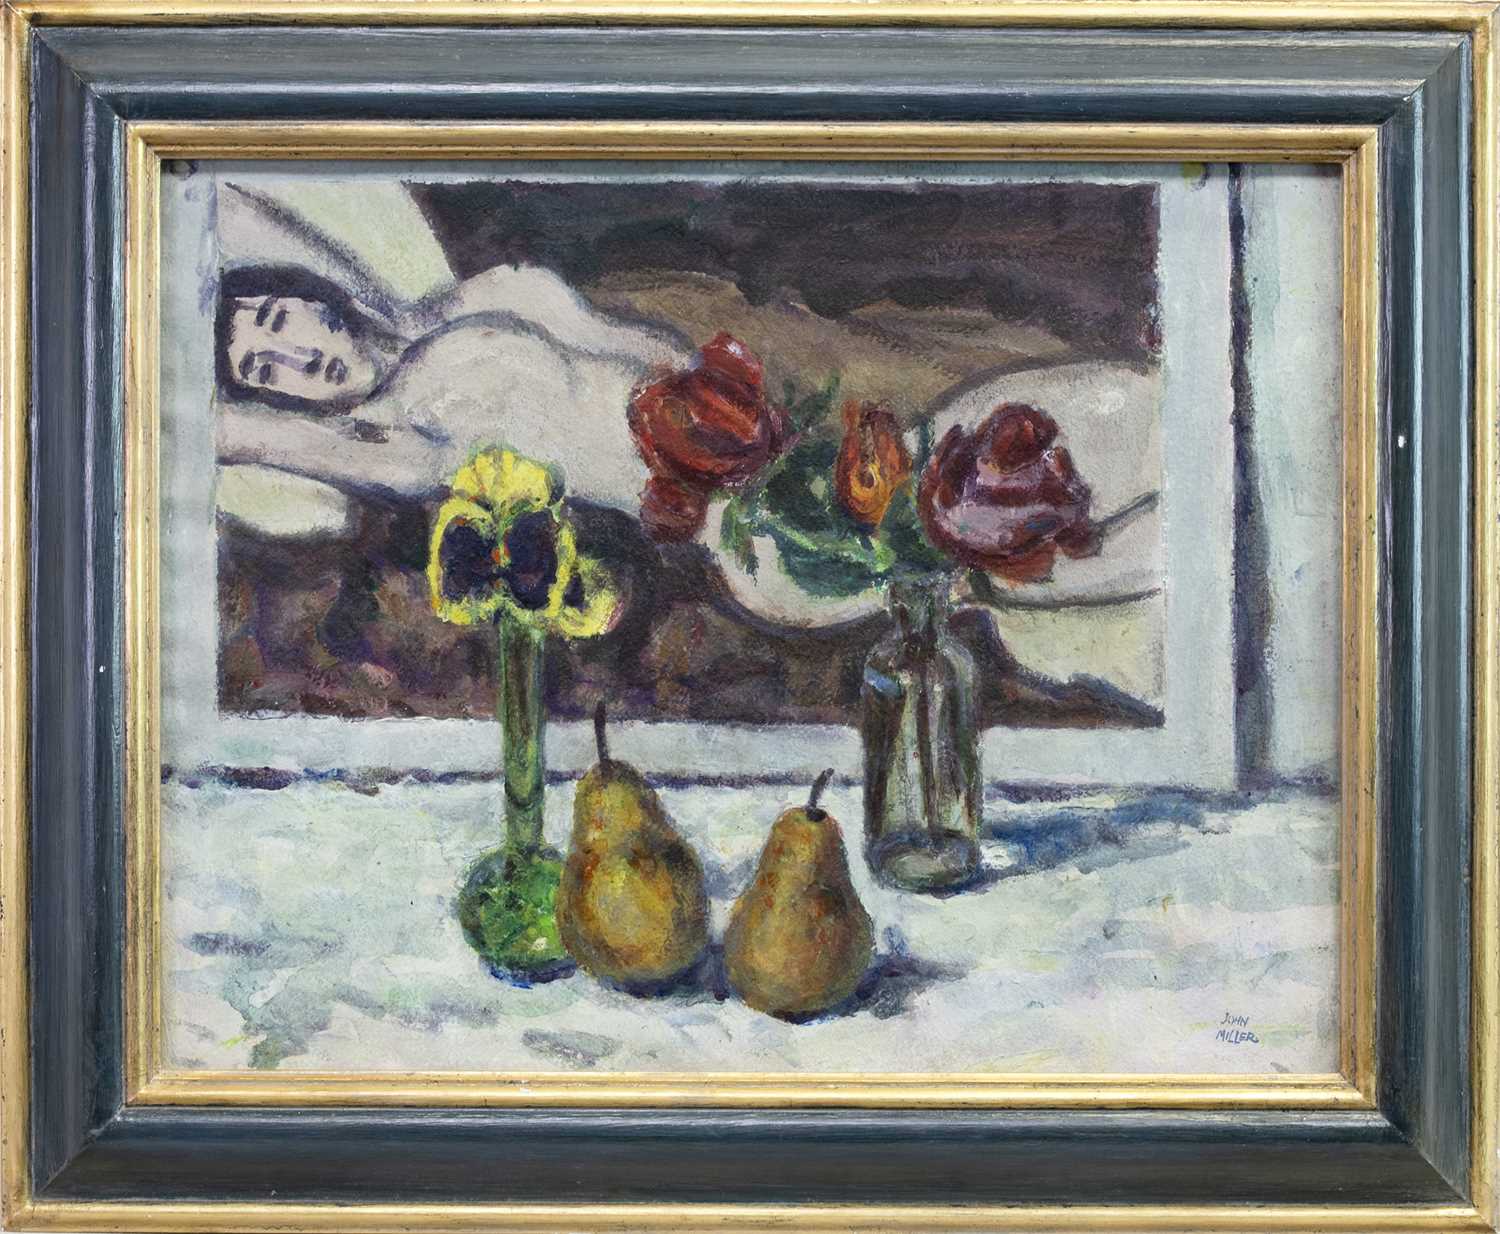 Lot 106 - STILL LIFE WITH A PAINTING, AN OIL BY JOHN MILLER